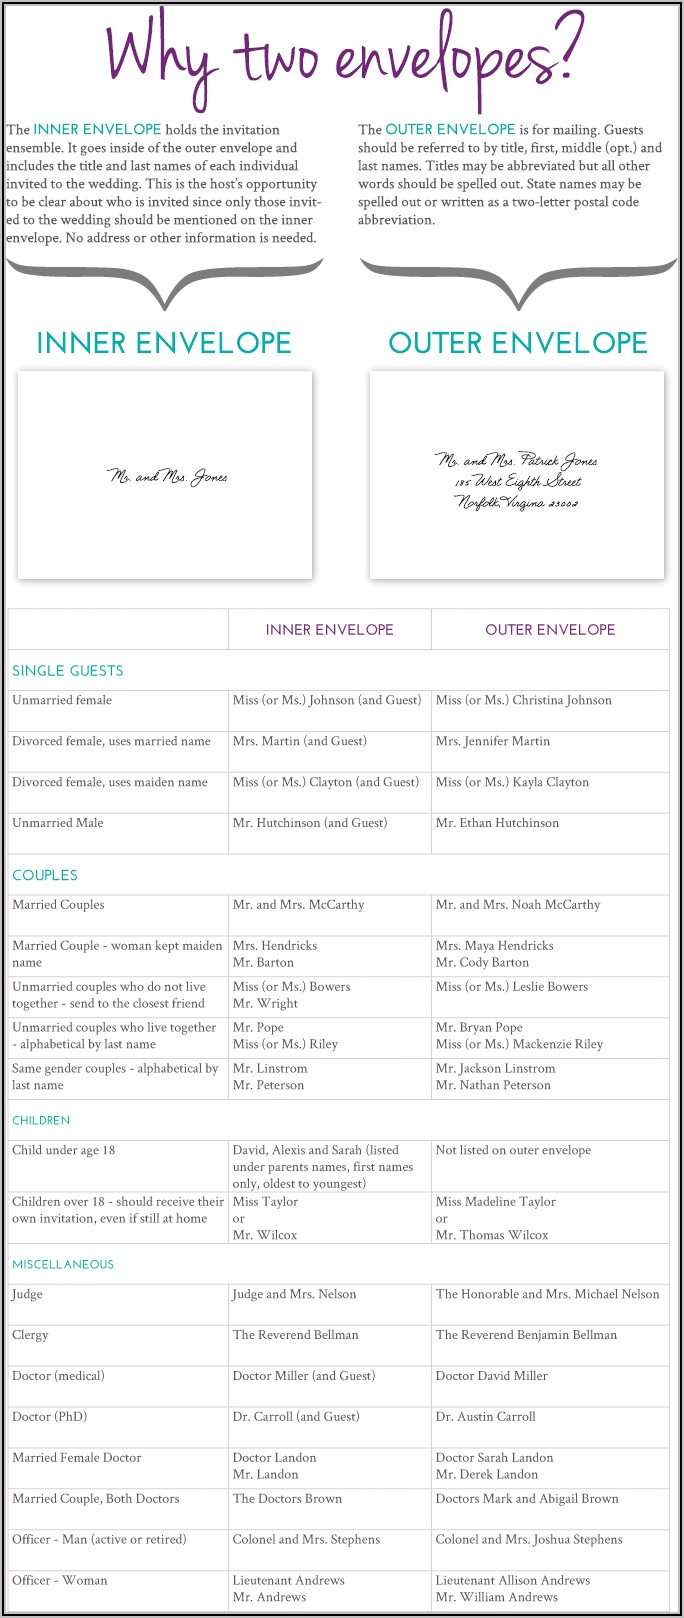 Wedding Invitations Inner And Outer Envelope Etiquette